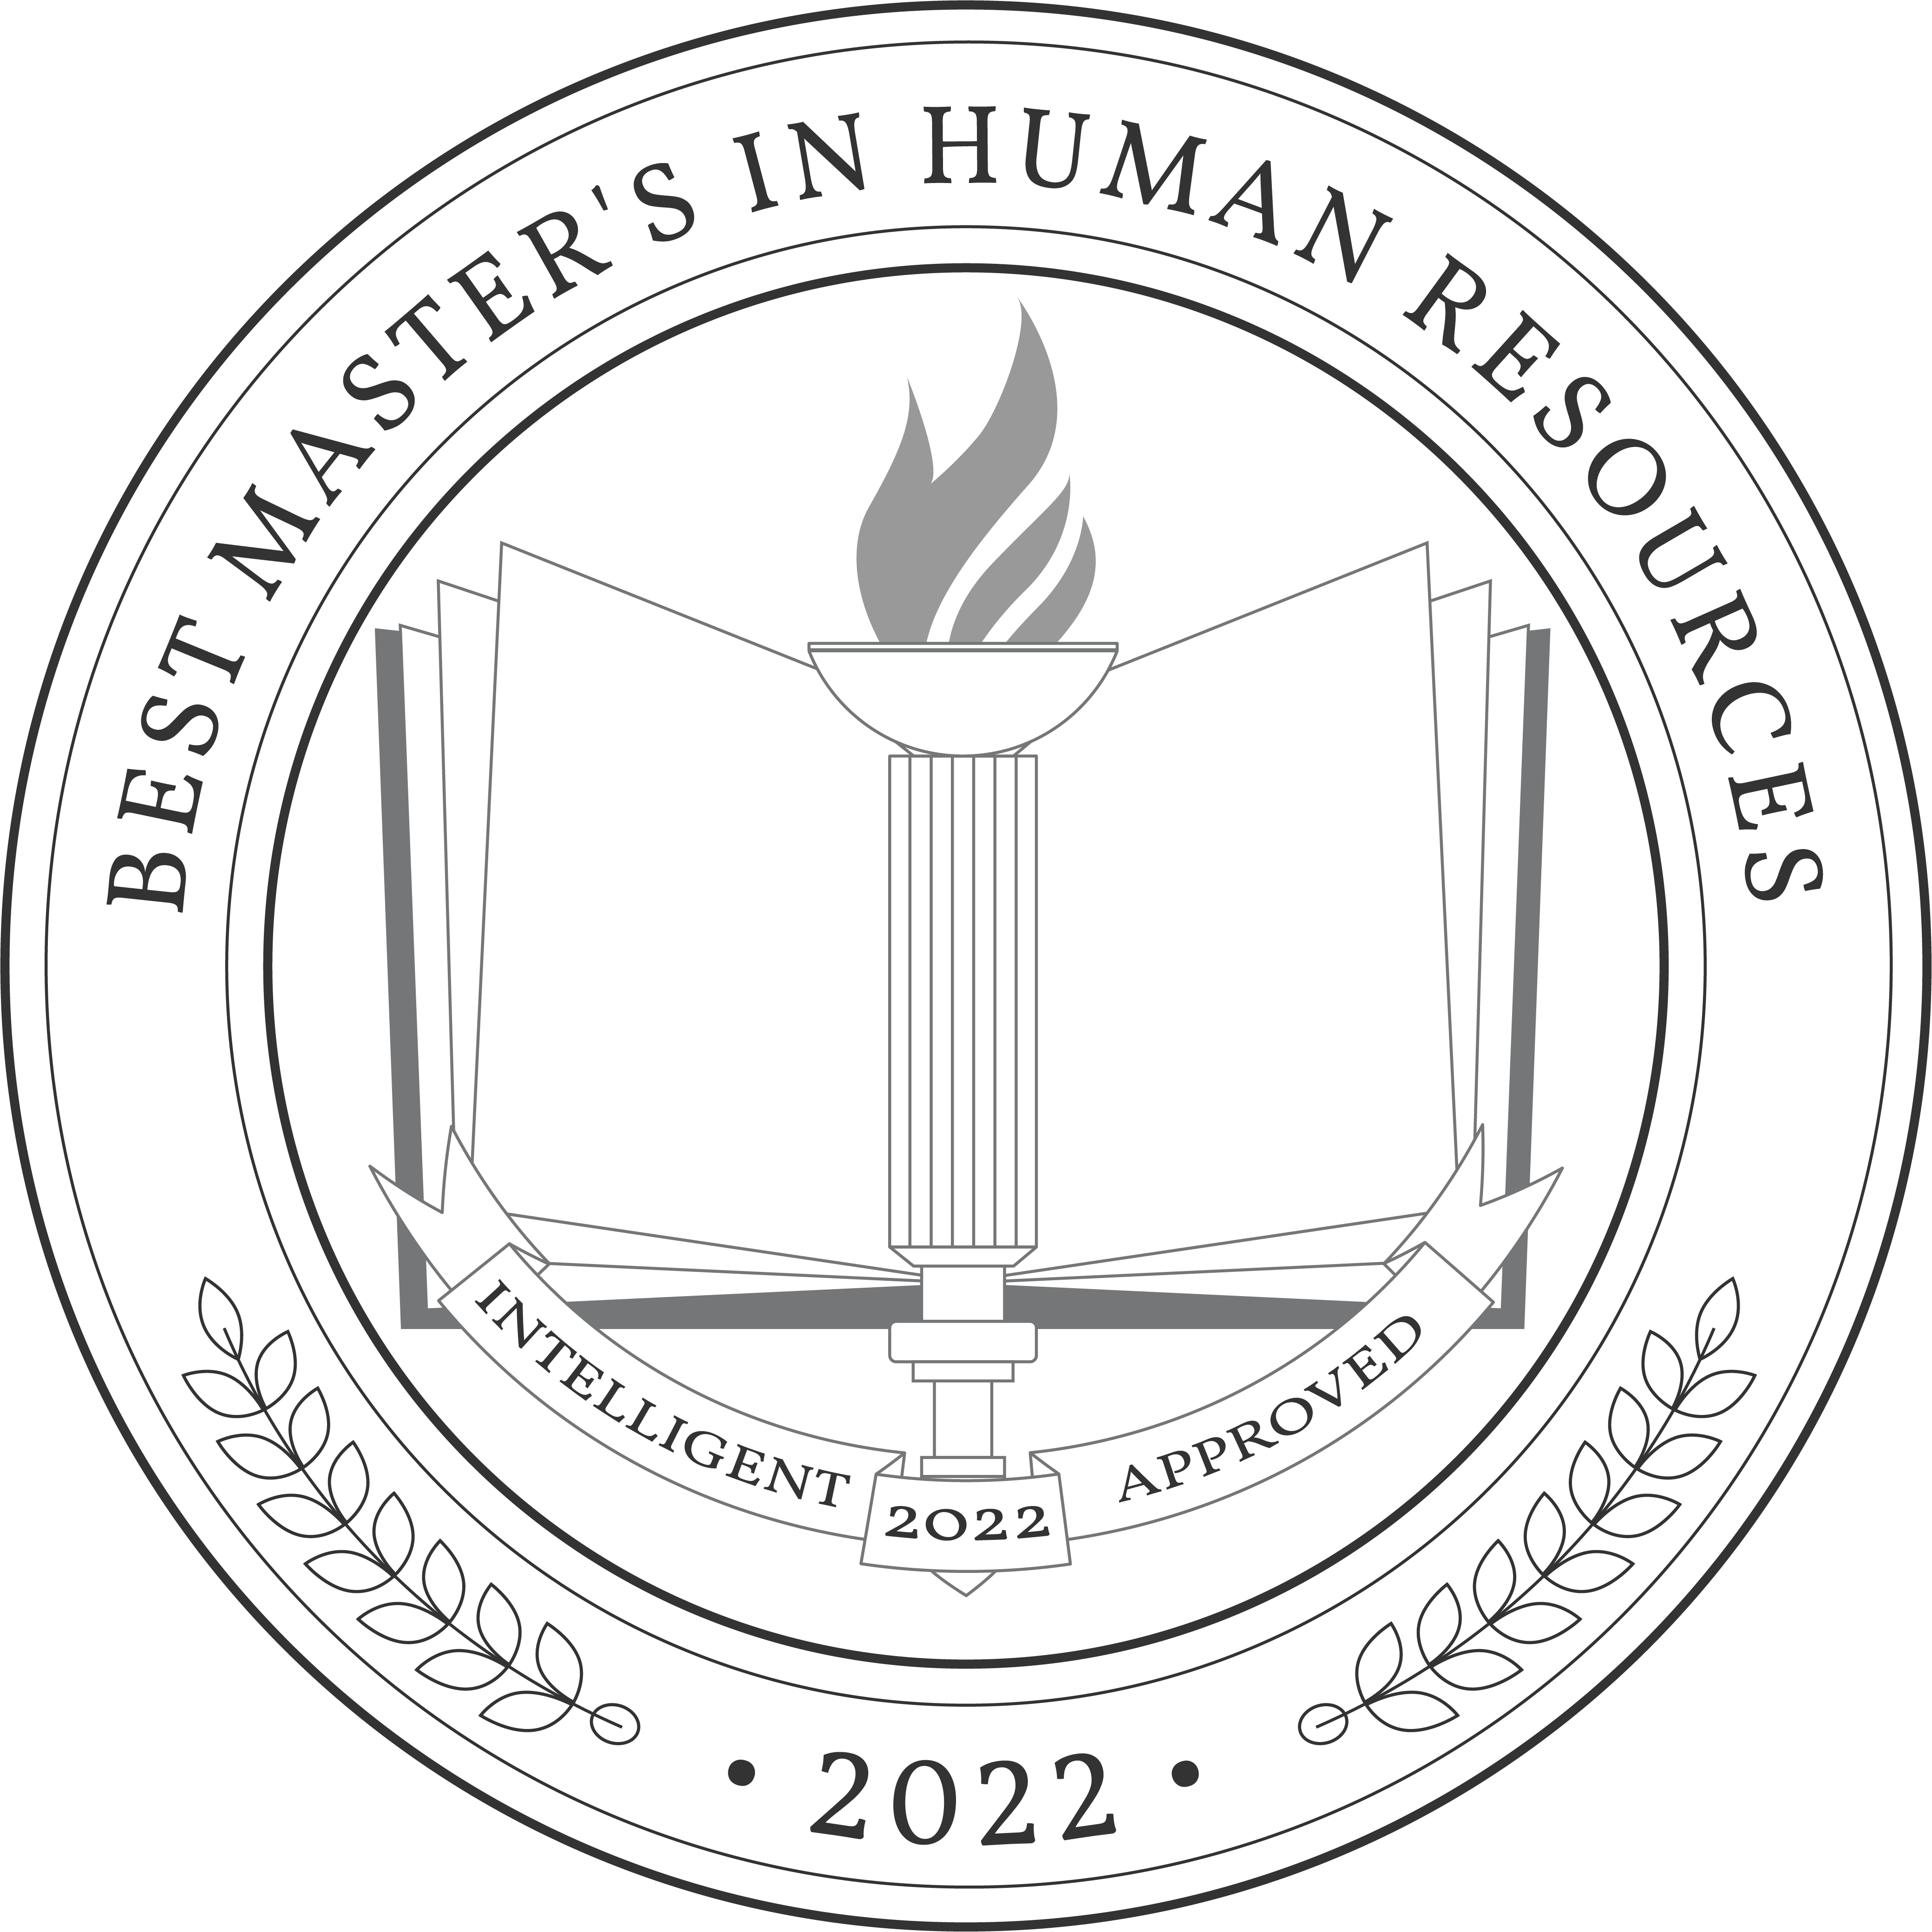 Best Master's in Human Resources Degree Programs